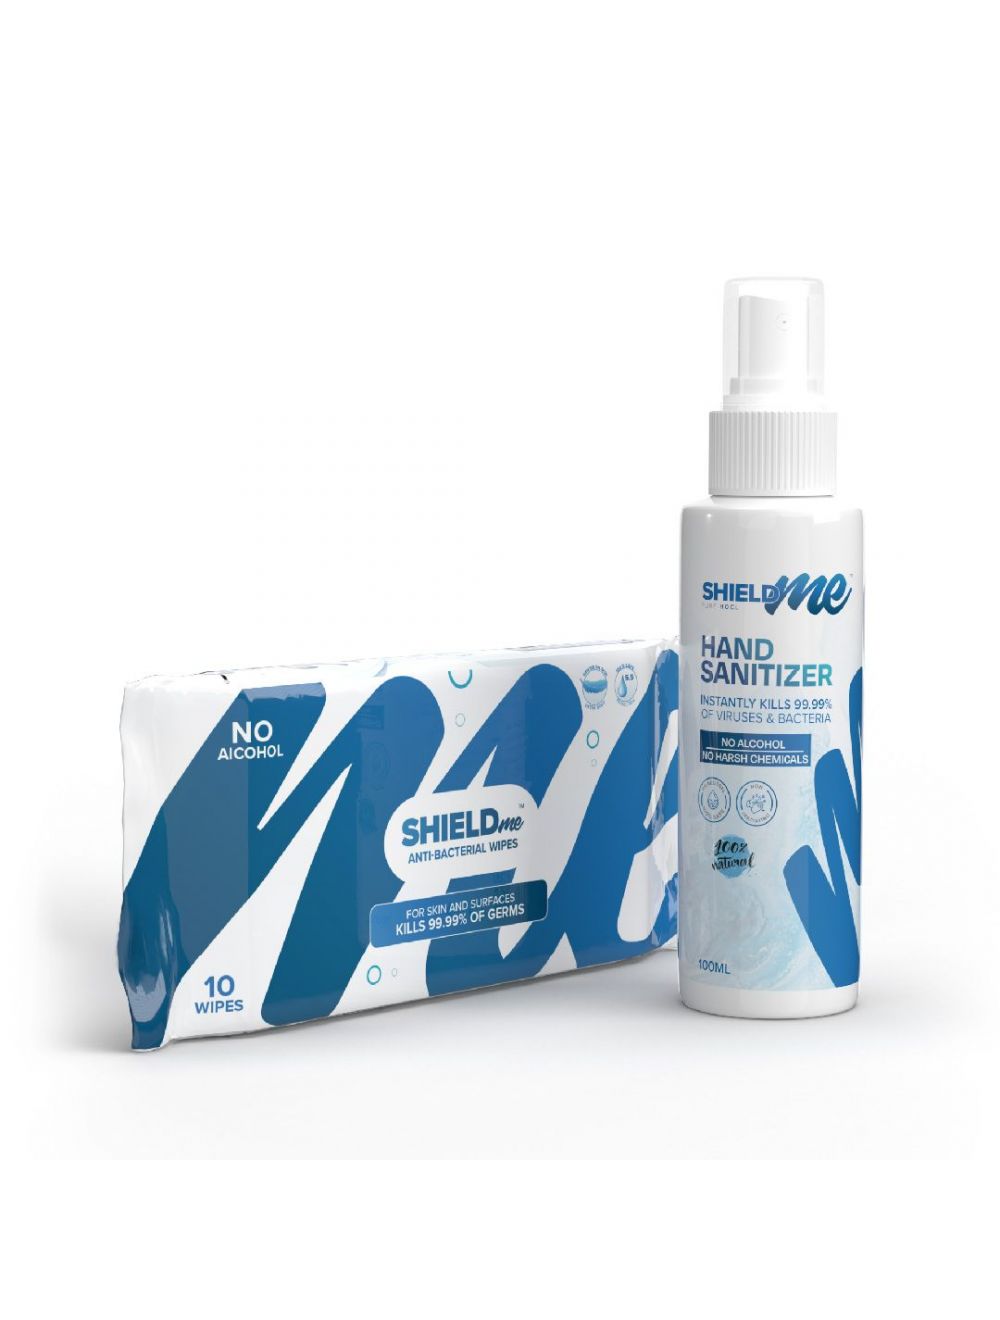 SHIELDme ON-THE-GO Disinfection Package -[100ML+ 10wipes Pack]-OB-NSCS-1ULW